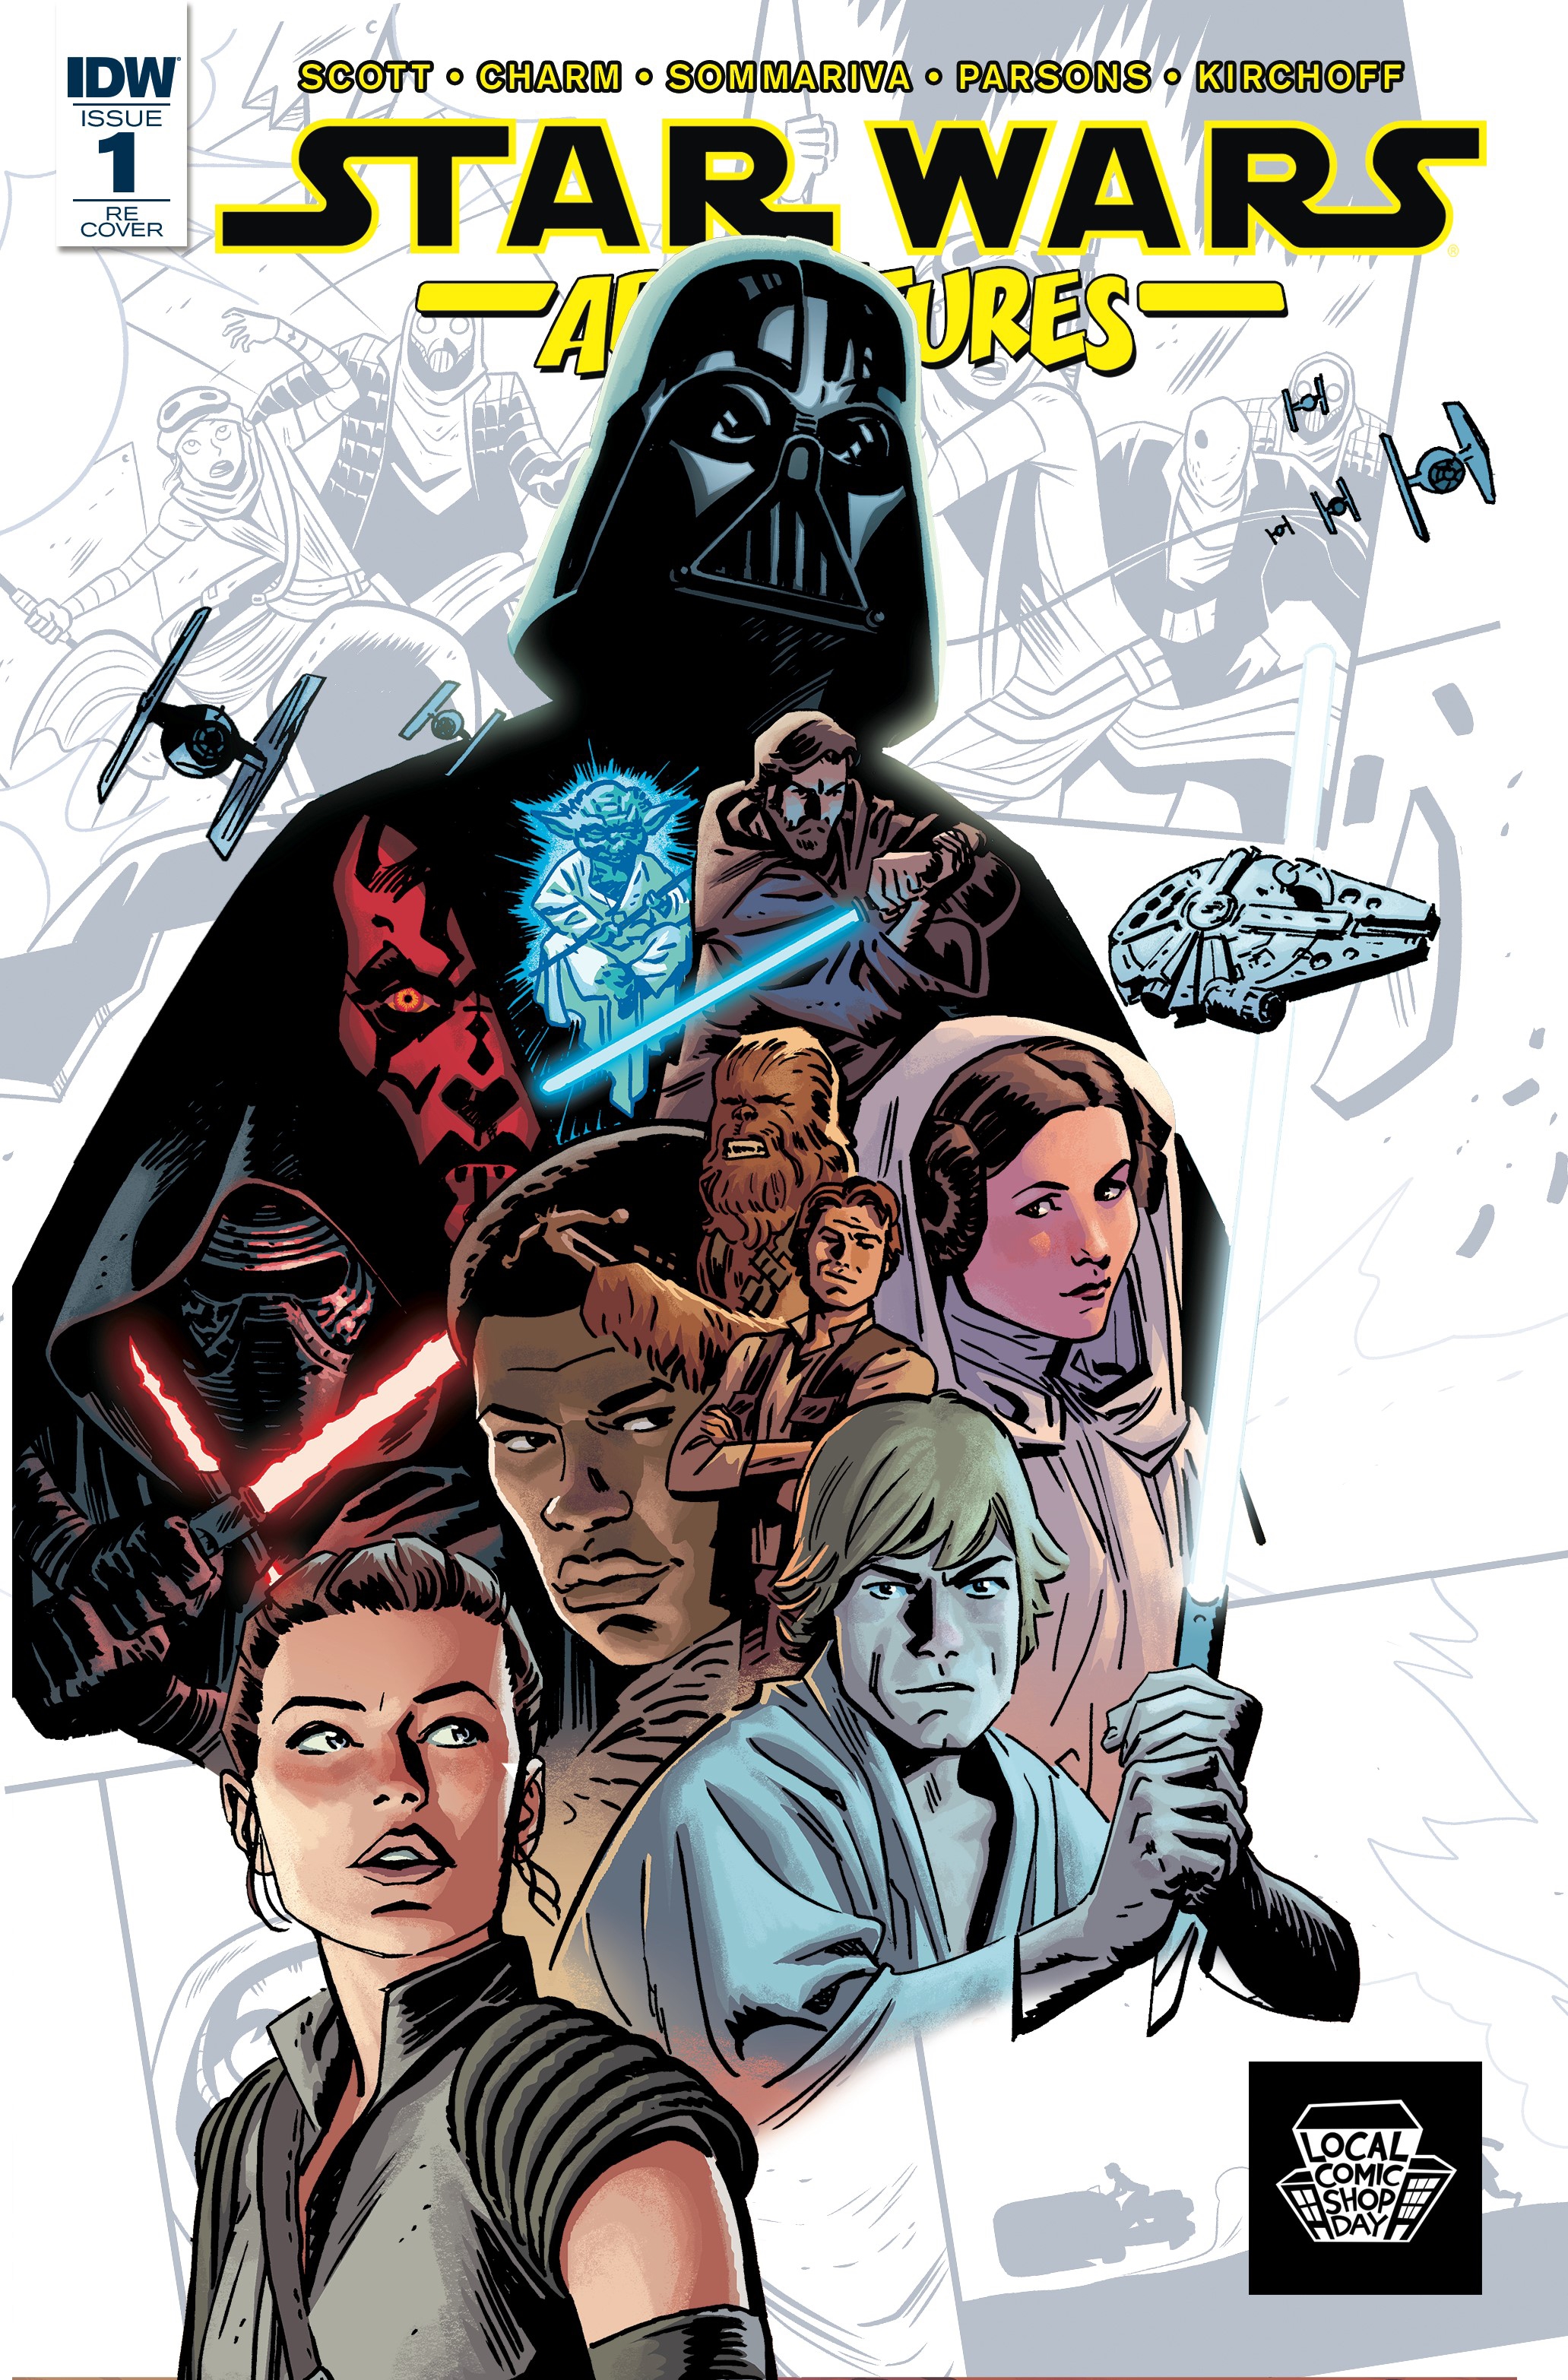 Star Wars Adventures #1 (Chris Samnee Local Comic Shop Day Variant Cover) (08.11.2017)